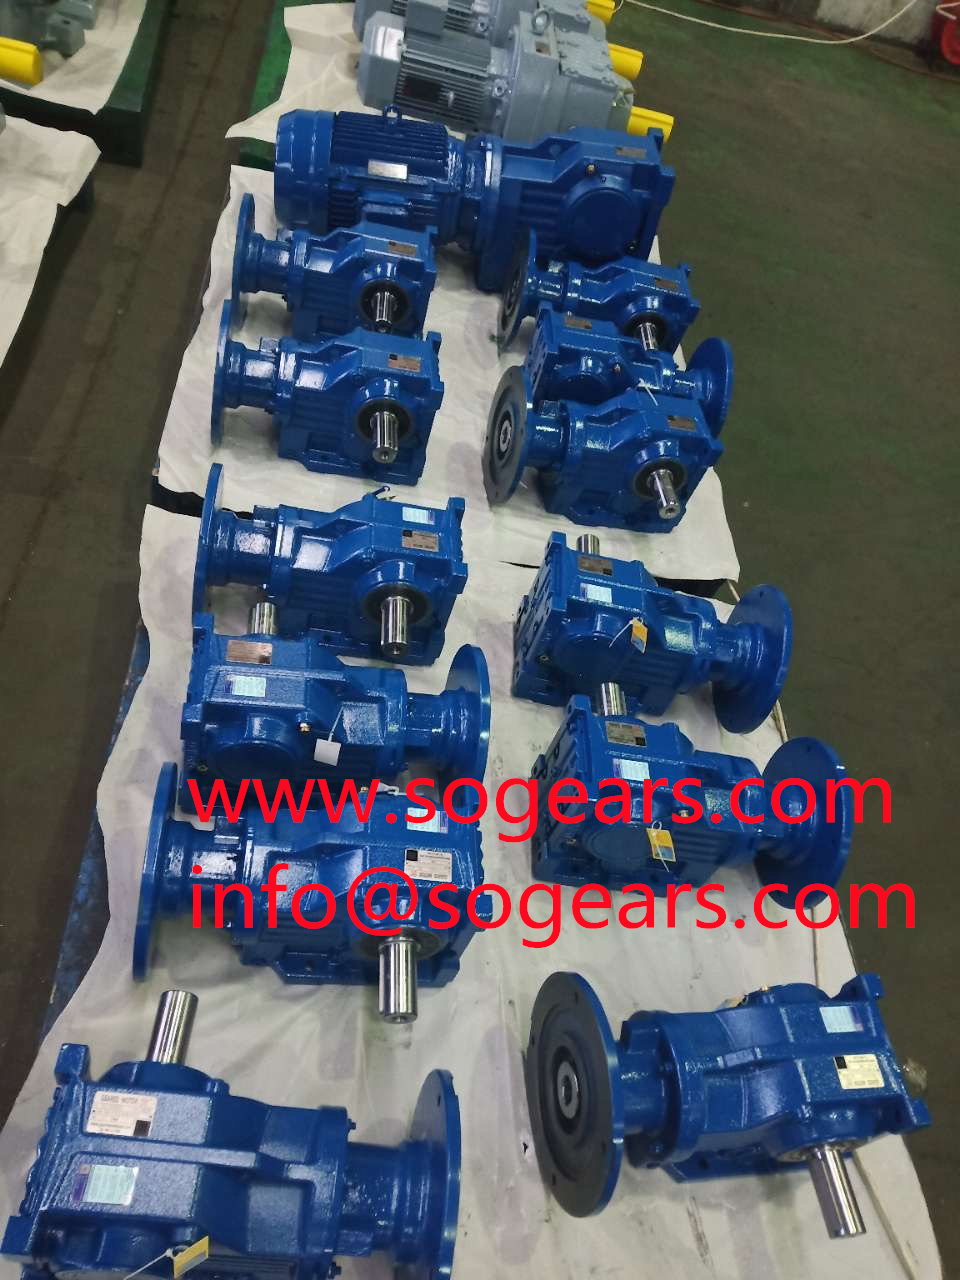 R187 Helical Gear Reduce Shaft Mounted Gearbox Gear Reducer with Electric  Motor Parallel Reducer